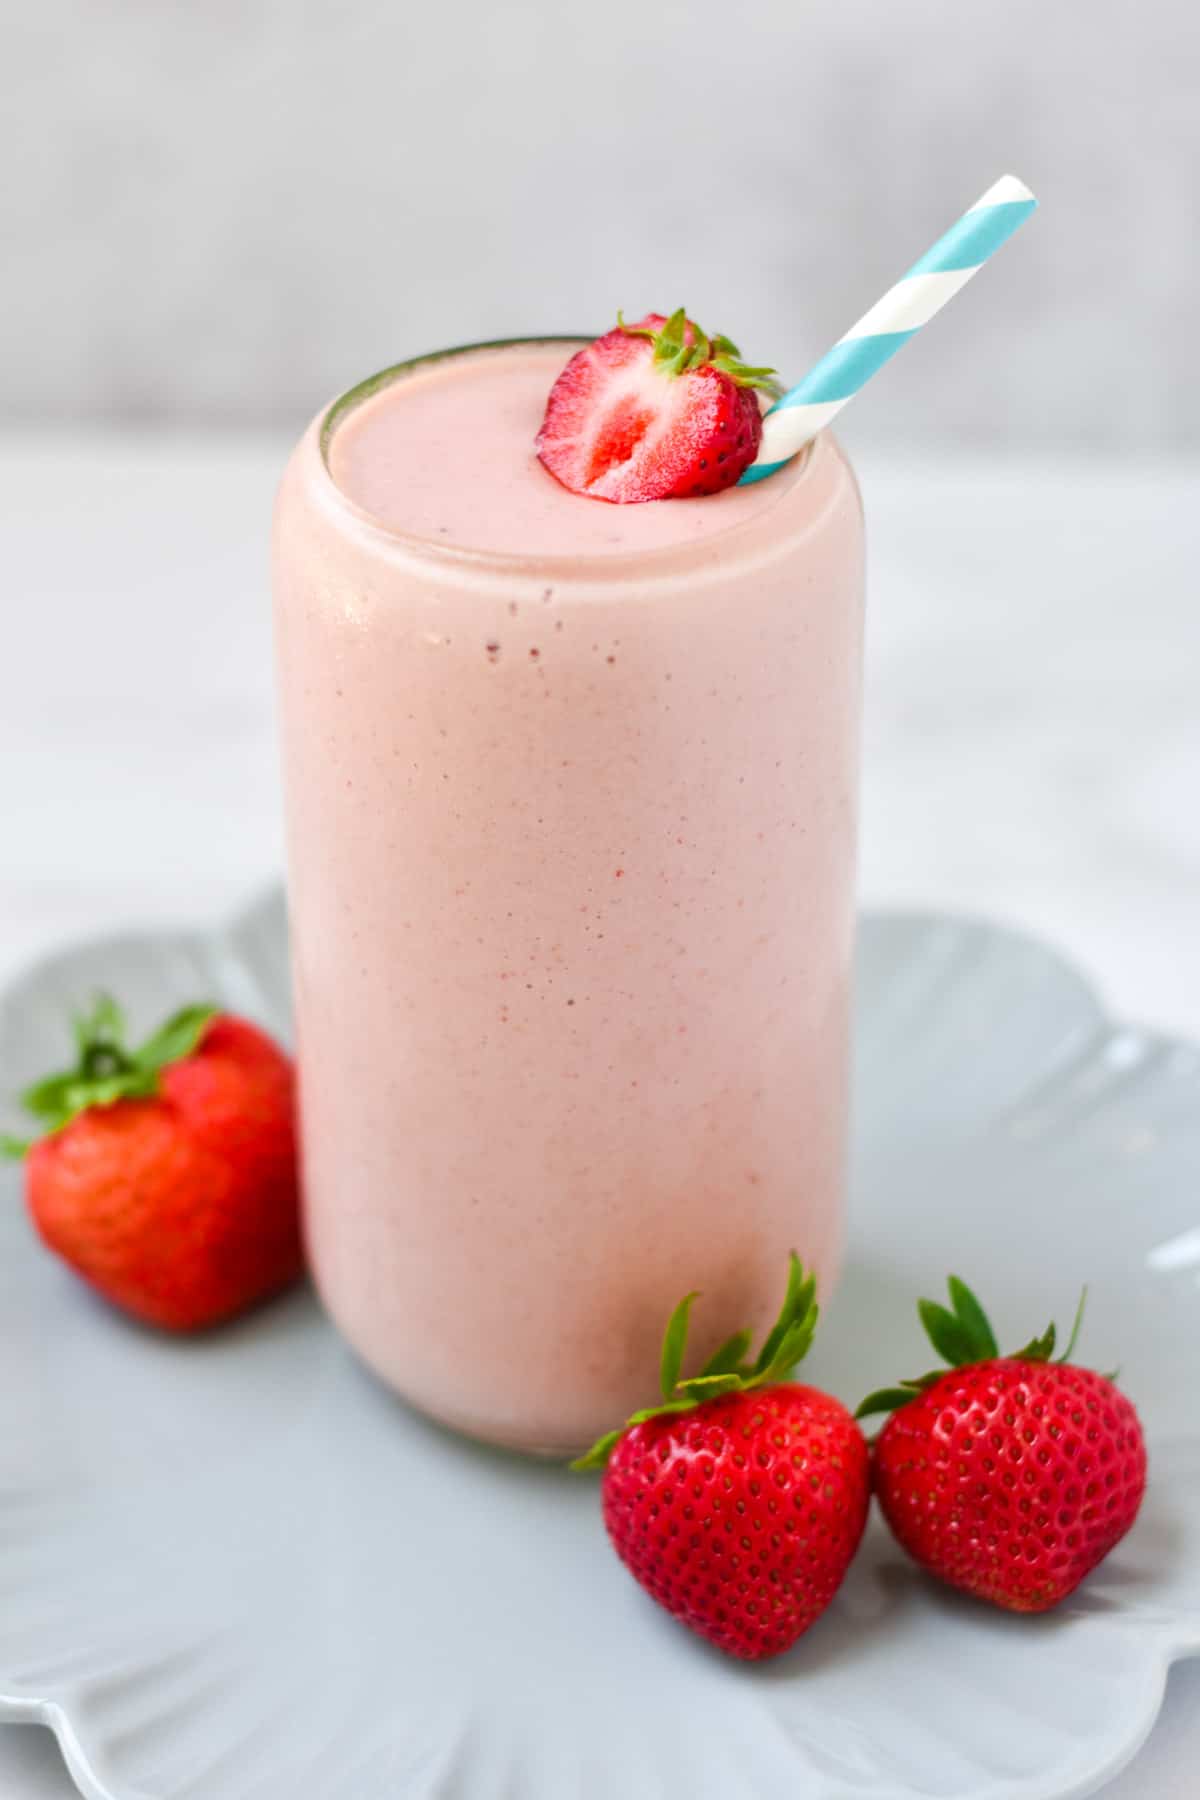 A pink smoothie with a striped straw on a blue plate with strawberries.